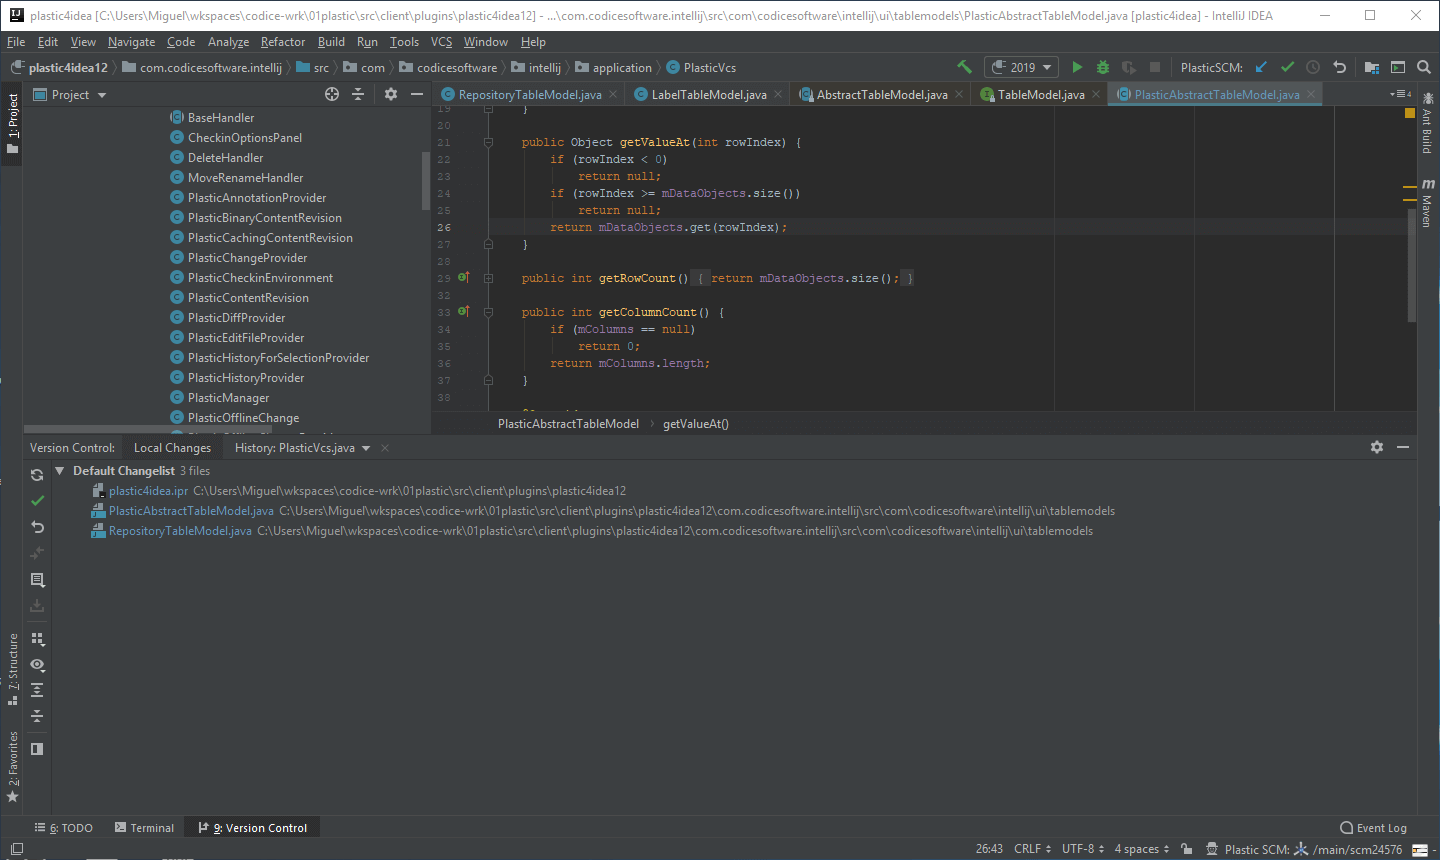 general-view-of-the-vcs-panel-in-intellij-idea